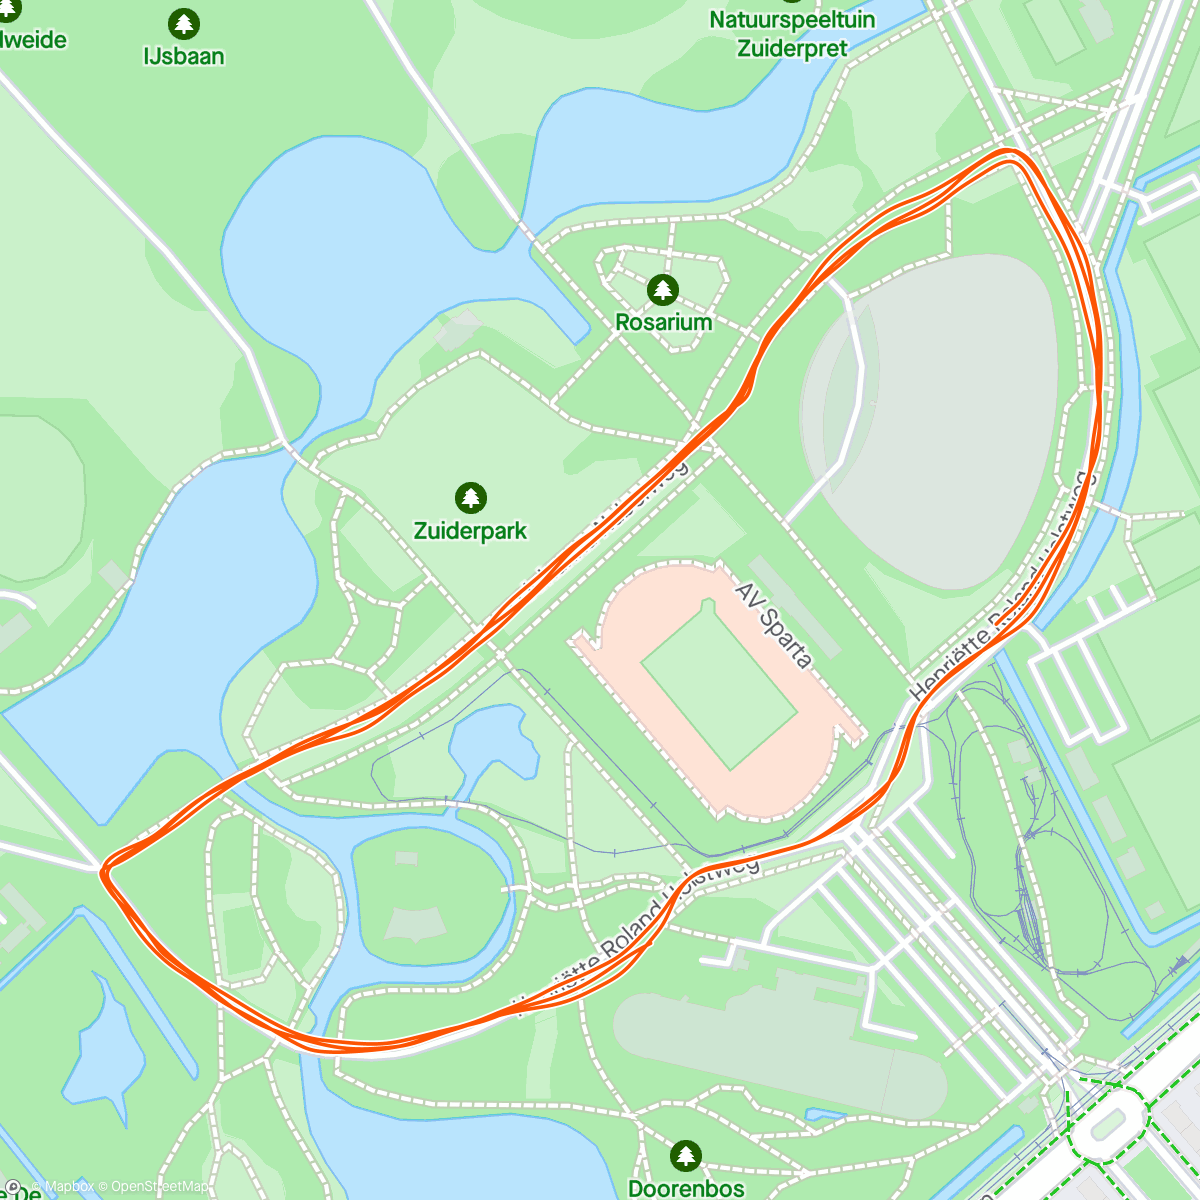 「Yah got my ‘Z’ Parkrun at Zuiderpark Den Haag in the pouring rain on a revised course at it was the King’s Birthday 👑」活動的地圖